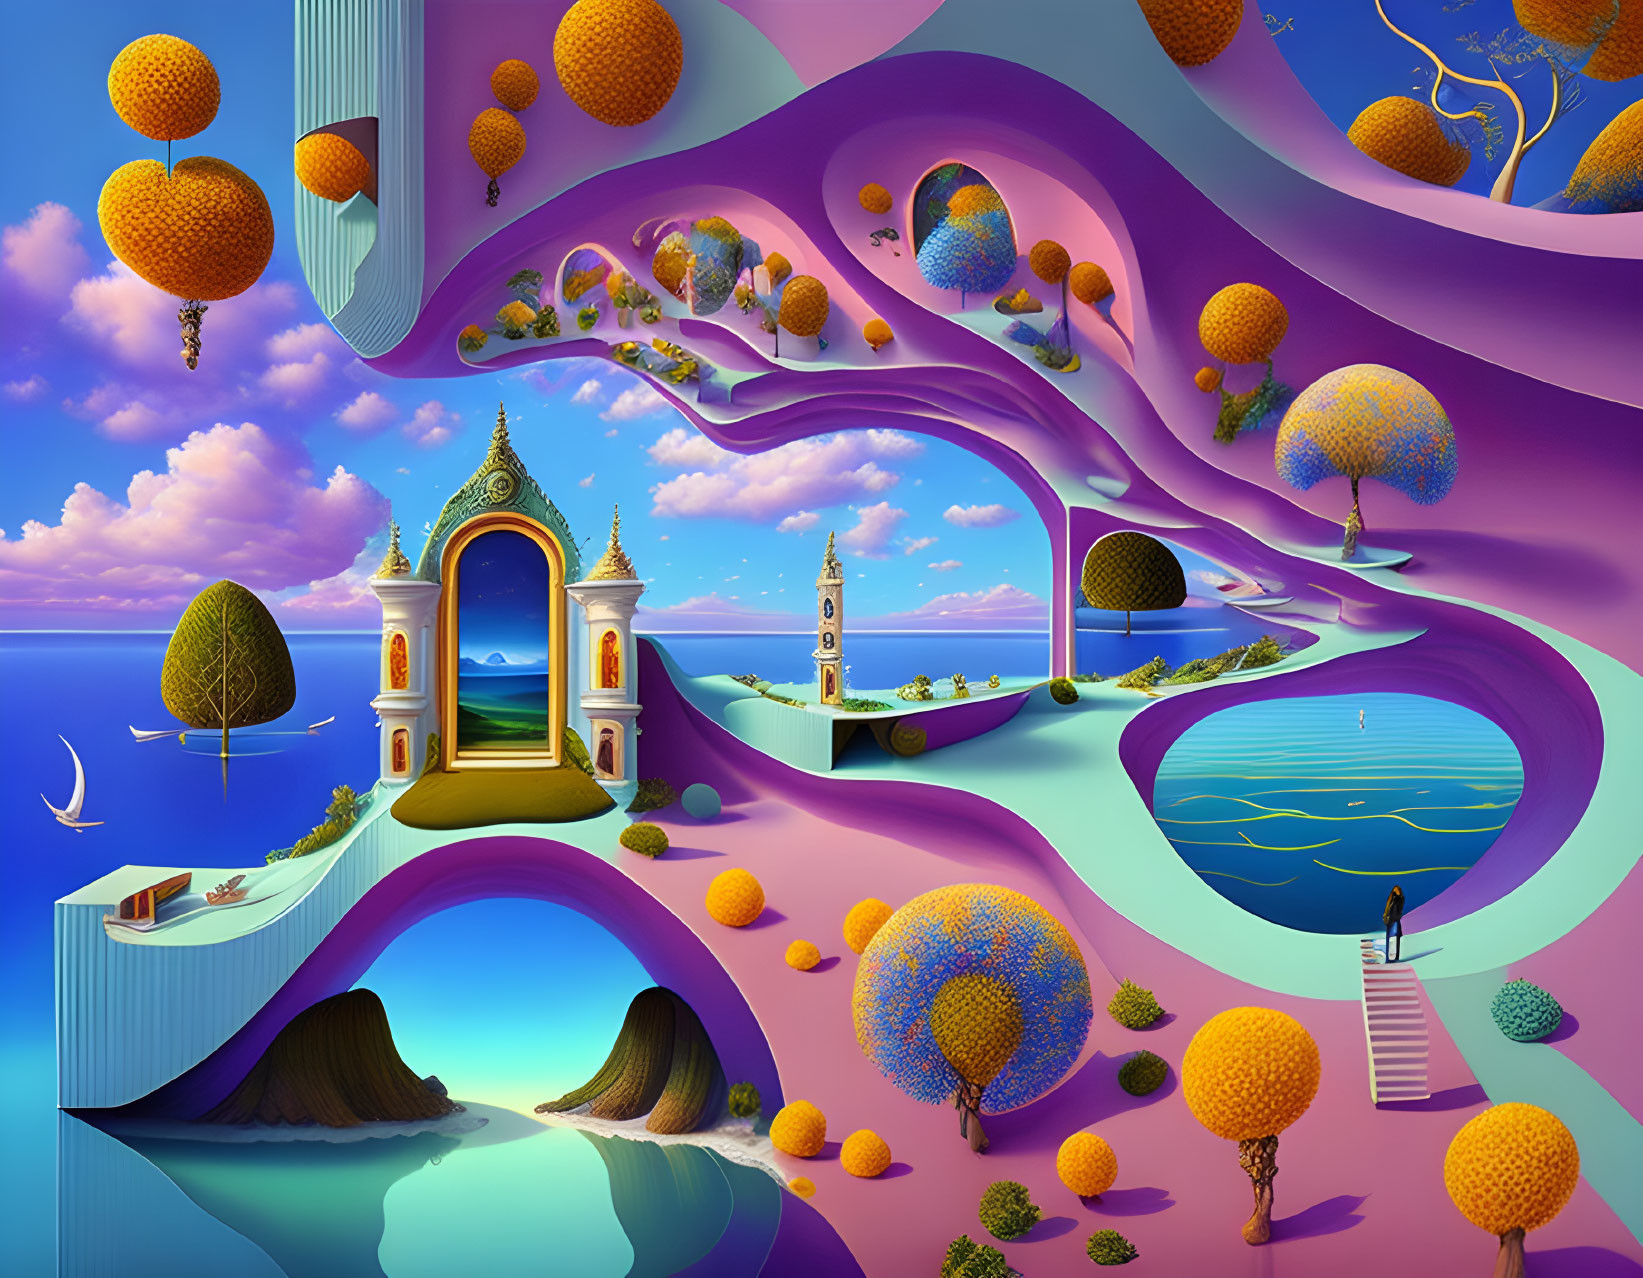 Colorful surreal landscape with archways, floating islands, and whimsical trees